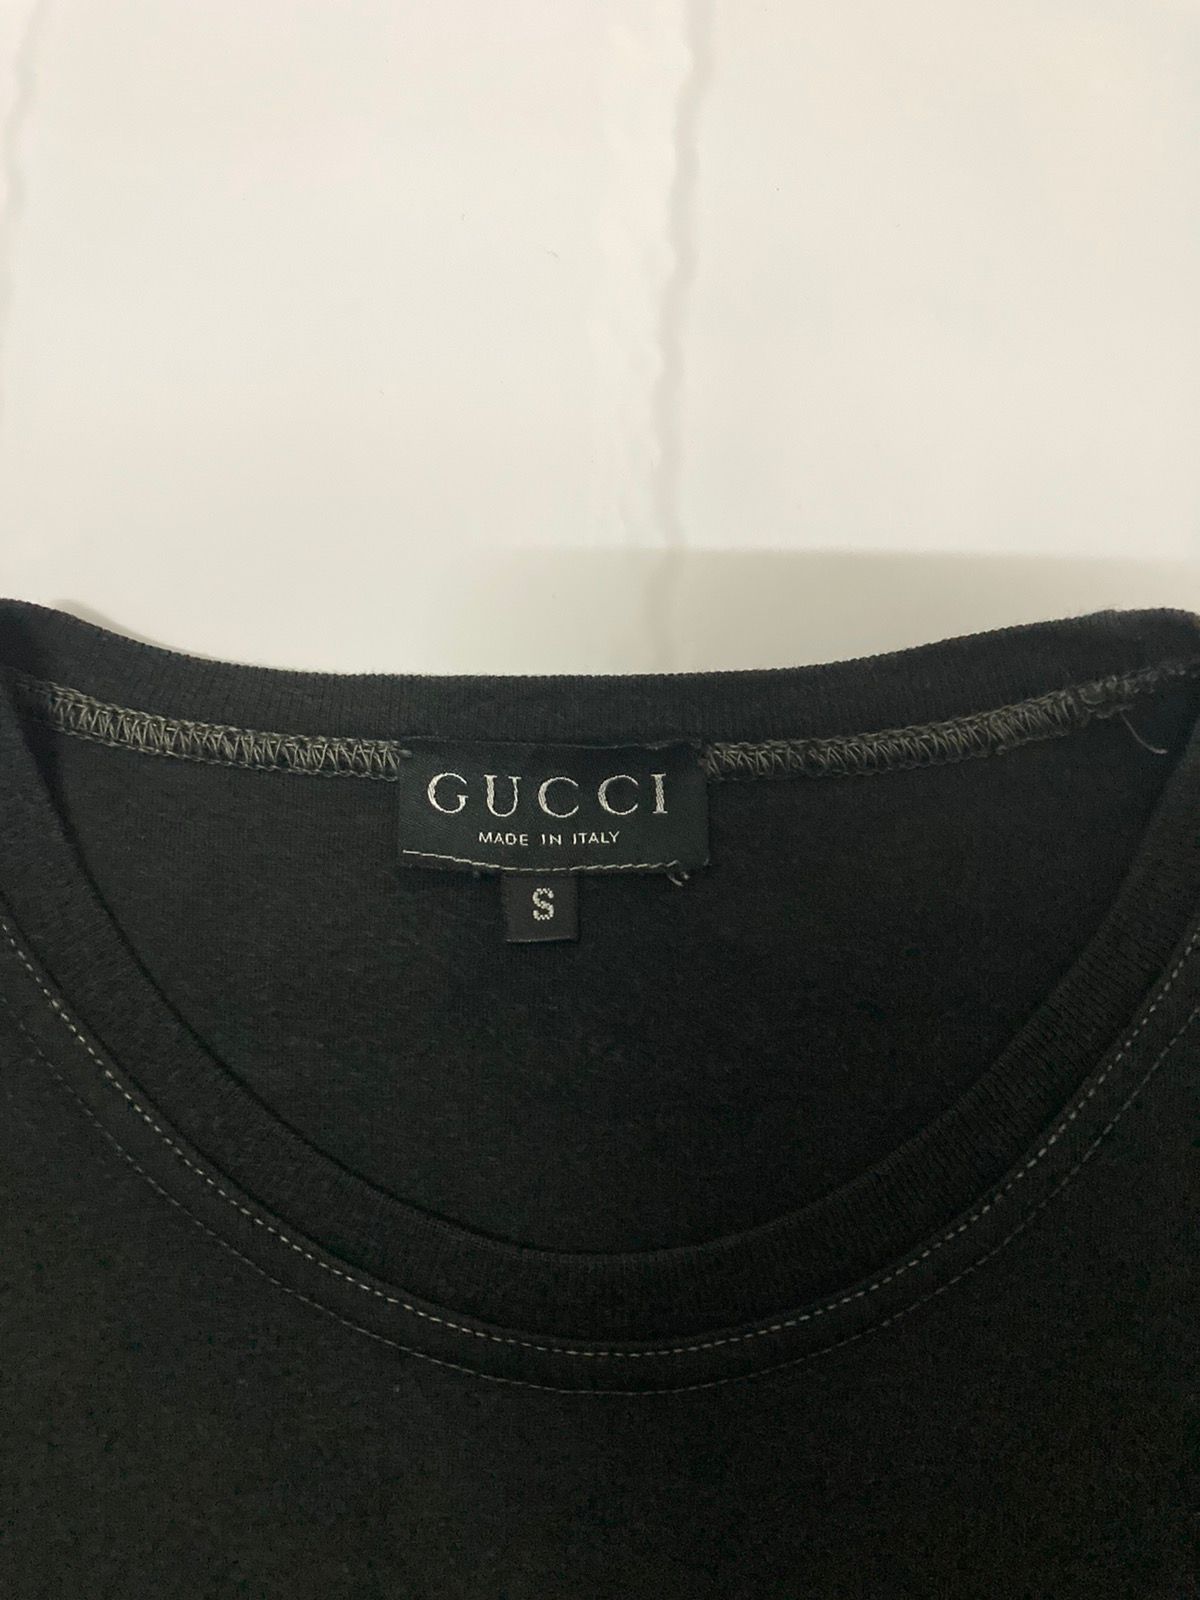 Gucci Embroidery Big Logo Shirt Made in Italy - 16